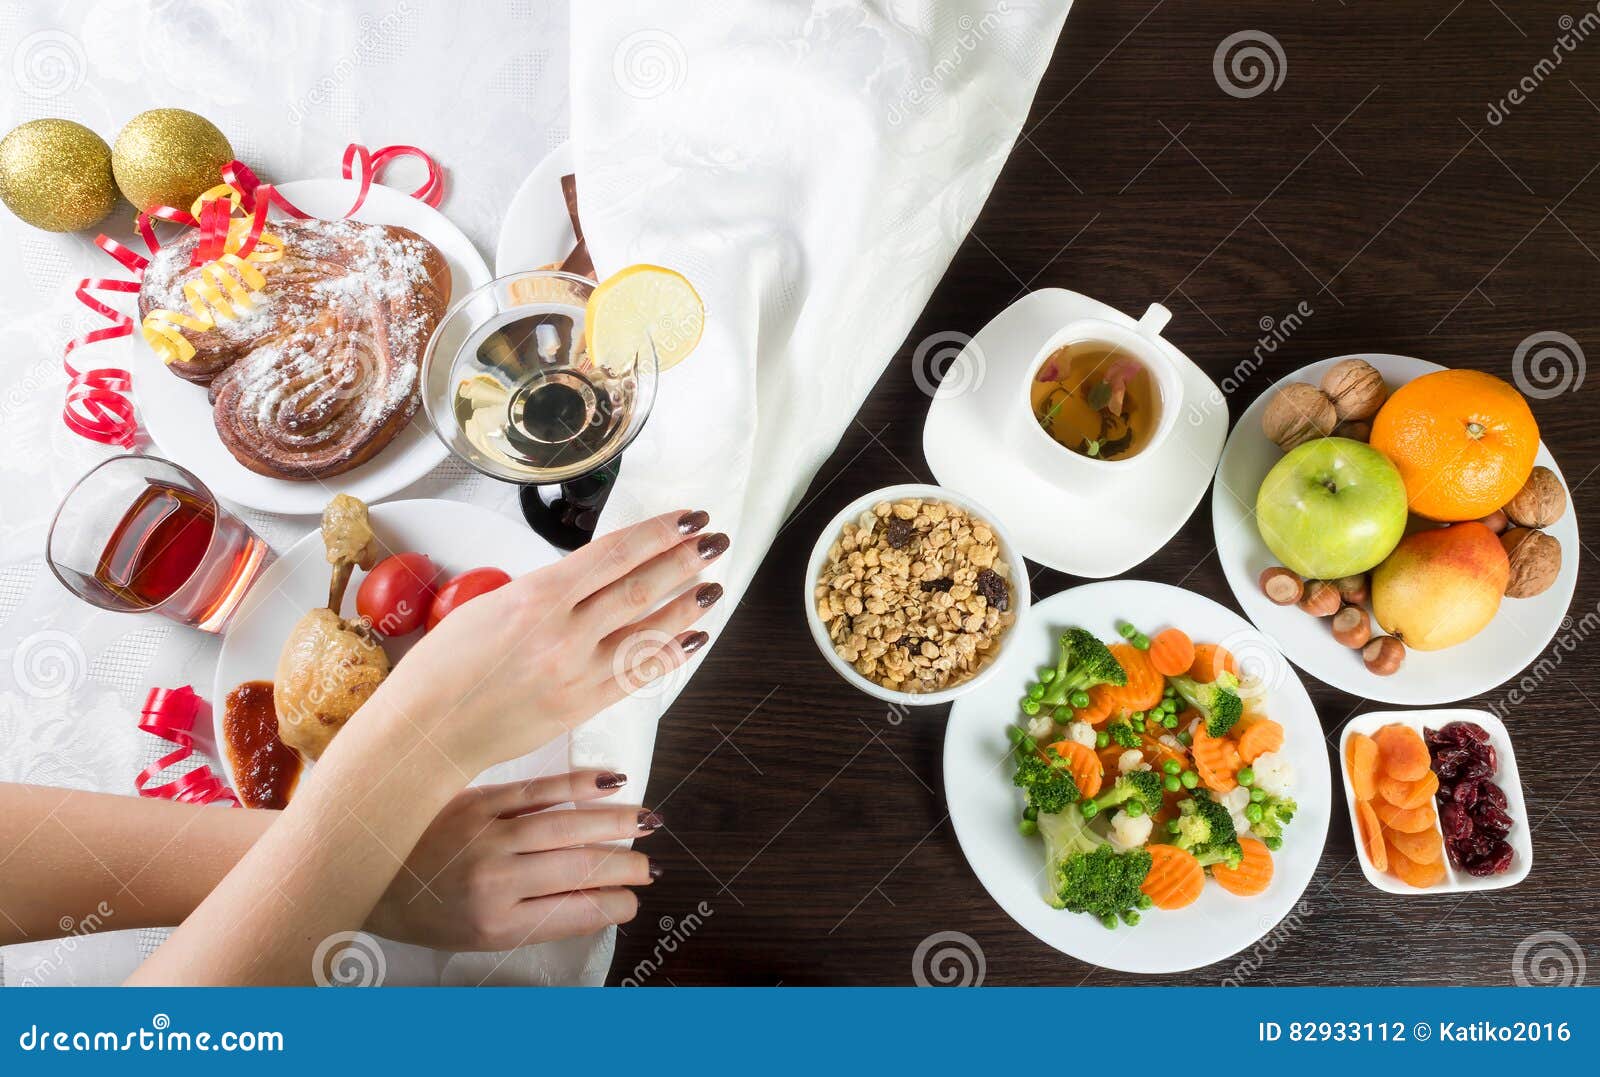 table with healthy and unhealthy food and alcohol. dieting after ÃÂ¡hristmas